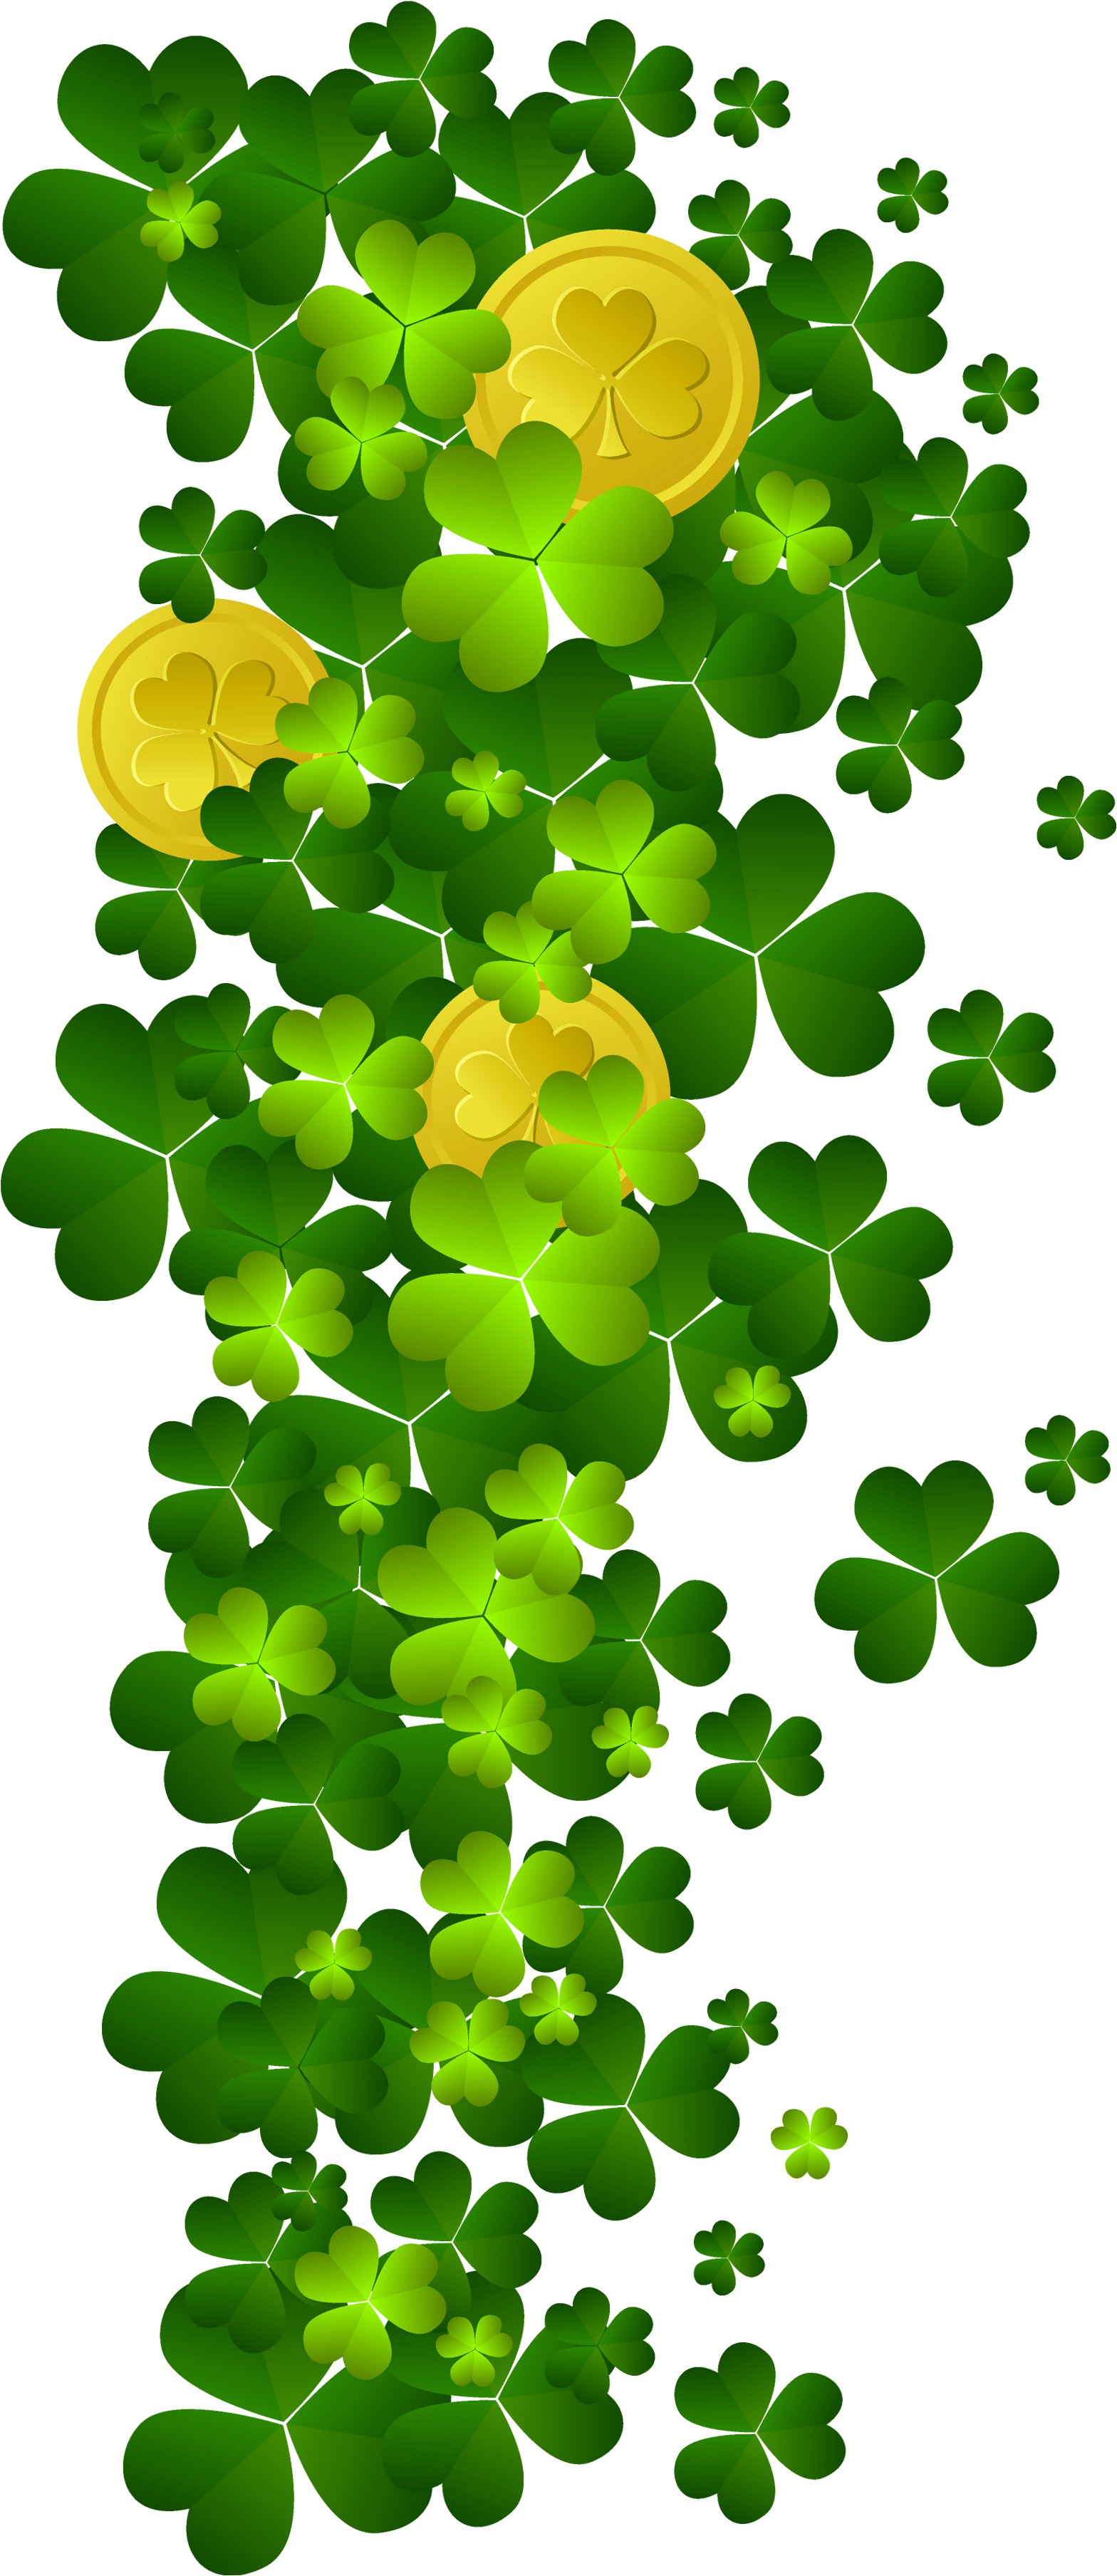 St Patricks Shamrock St Patricks Shamrock 27 With Coins - Gold Coins St Patricks Day Png (2056x3826)